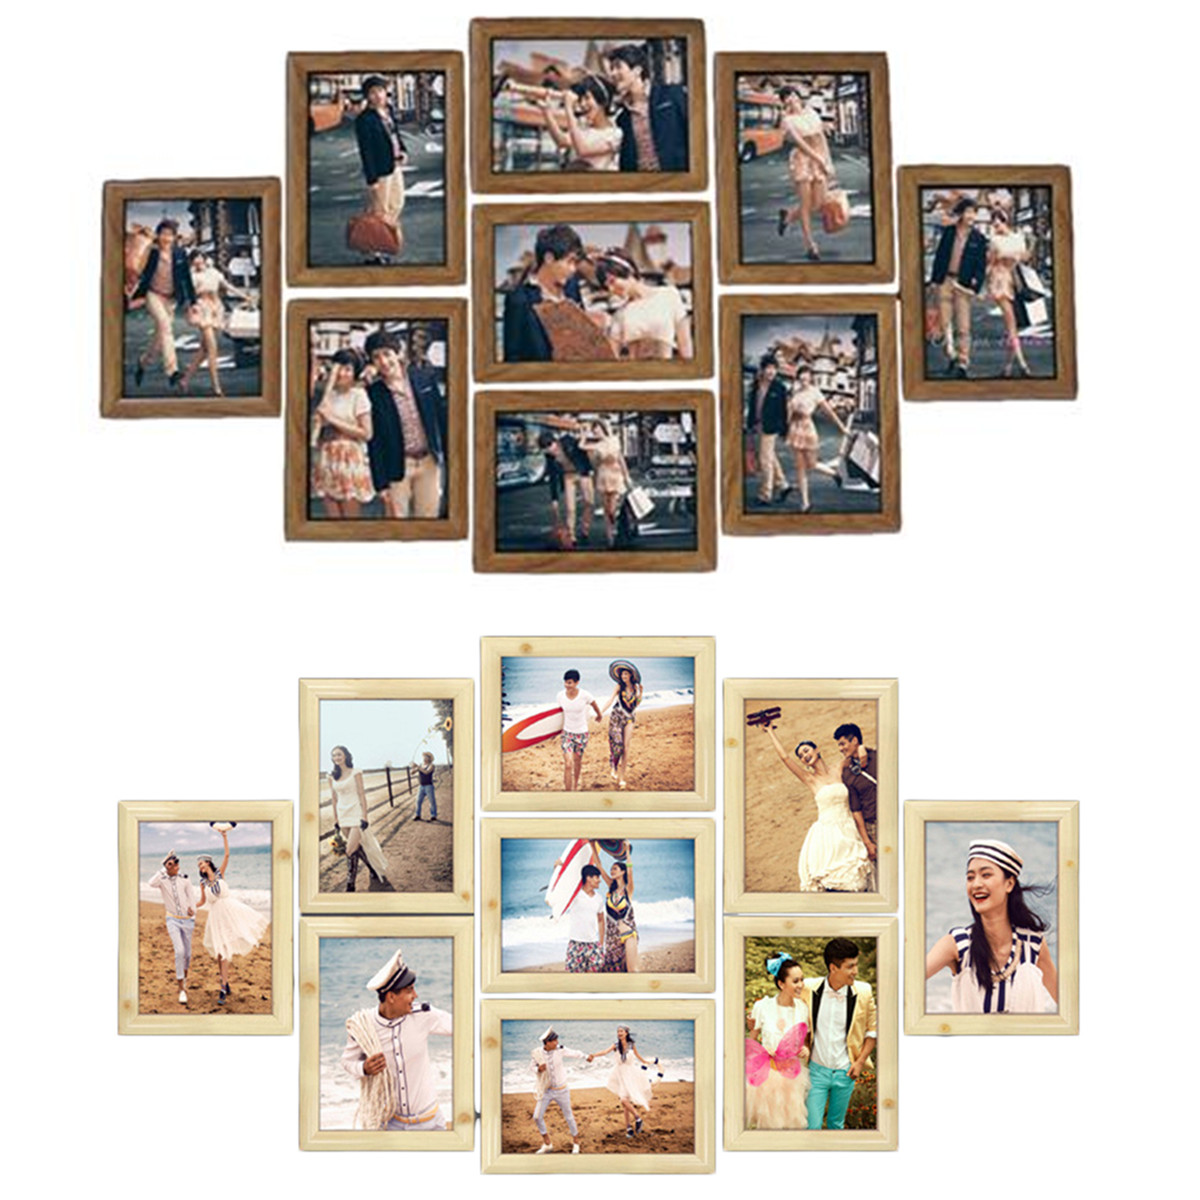 

DIY 9PCS Family Collage Wedding Photo Picture Frame Wall Hanging Display Home Decorations